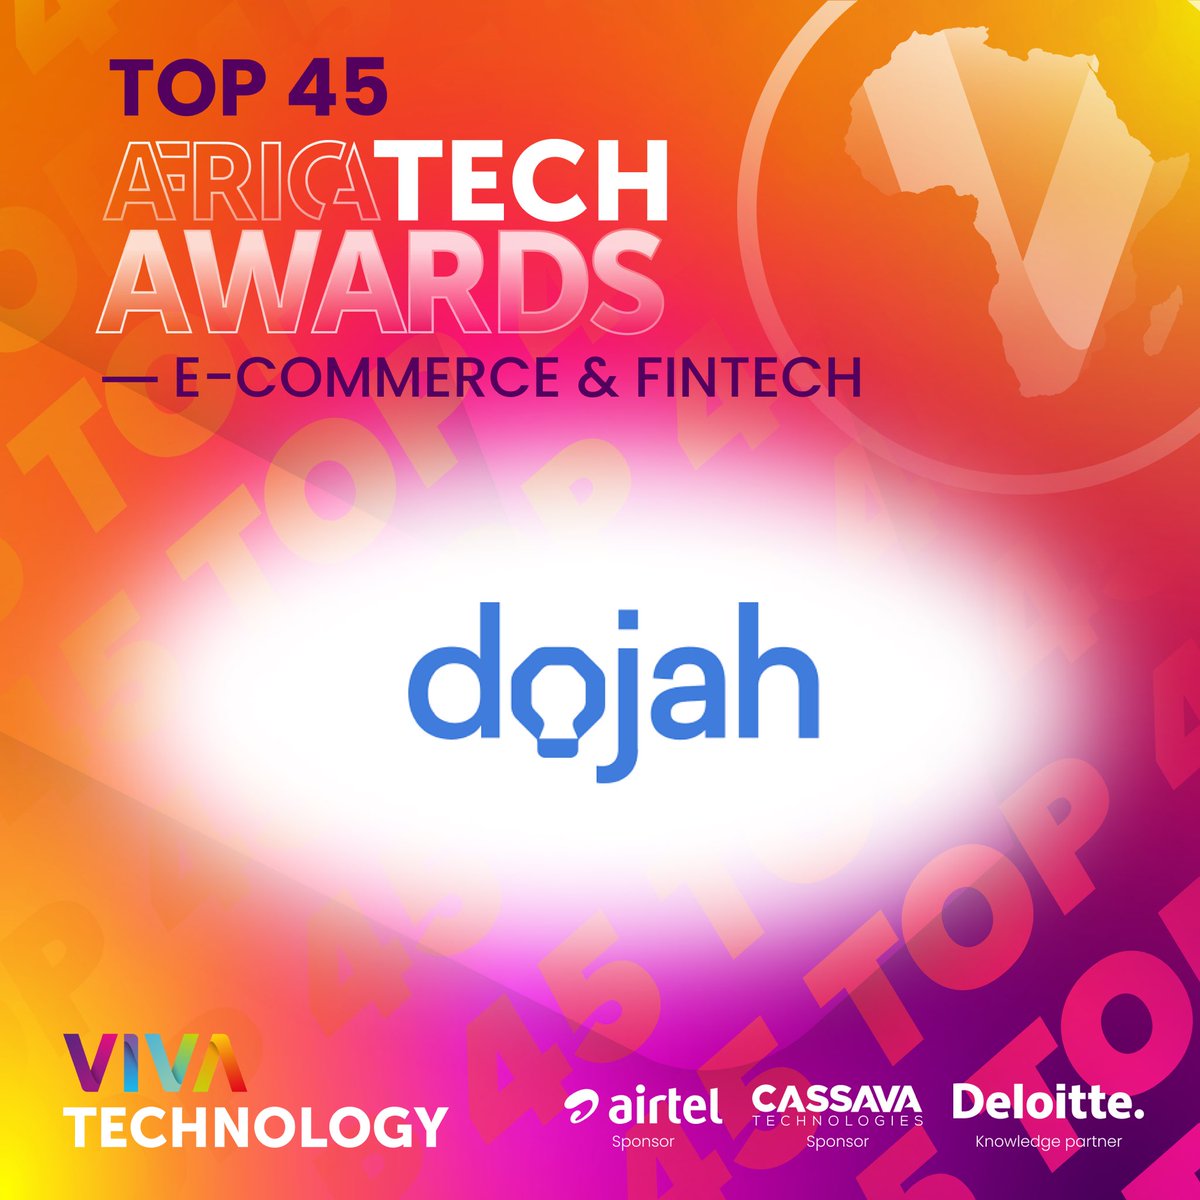 Exciting news! 

We're honored to be among the top 15 selected startups in the FinTech & Ecommerce category for the #AfricaTech Awards!🌍

🔥And we are just getting started – we will keep building and powering trust for African businesses 🎯